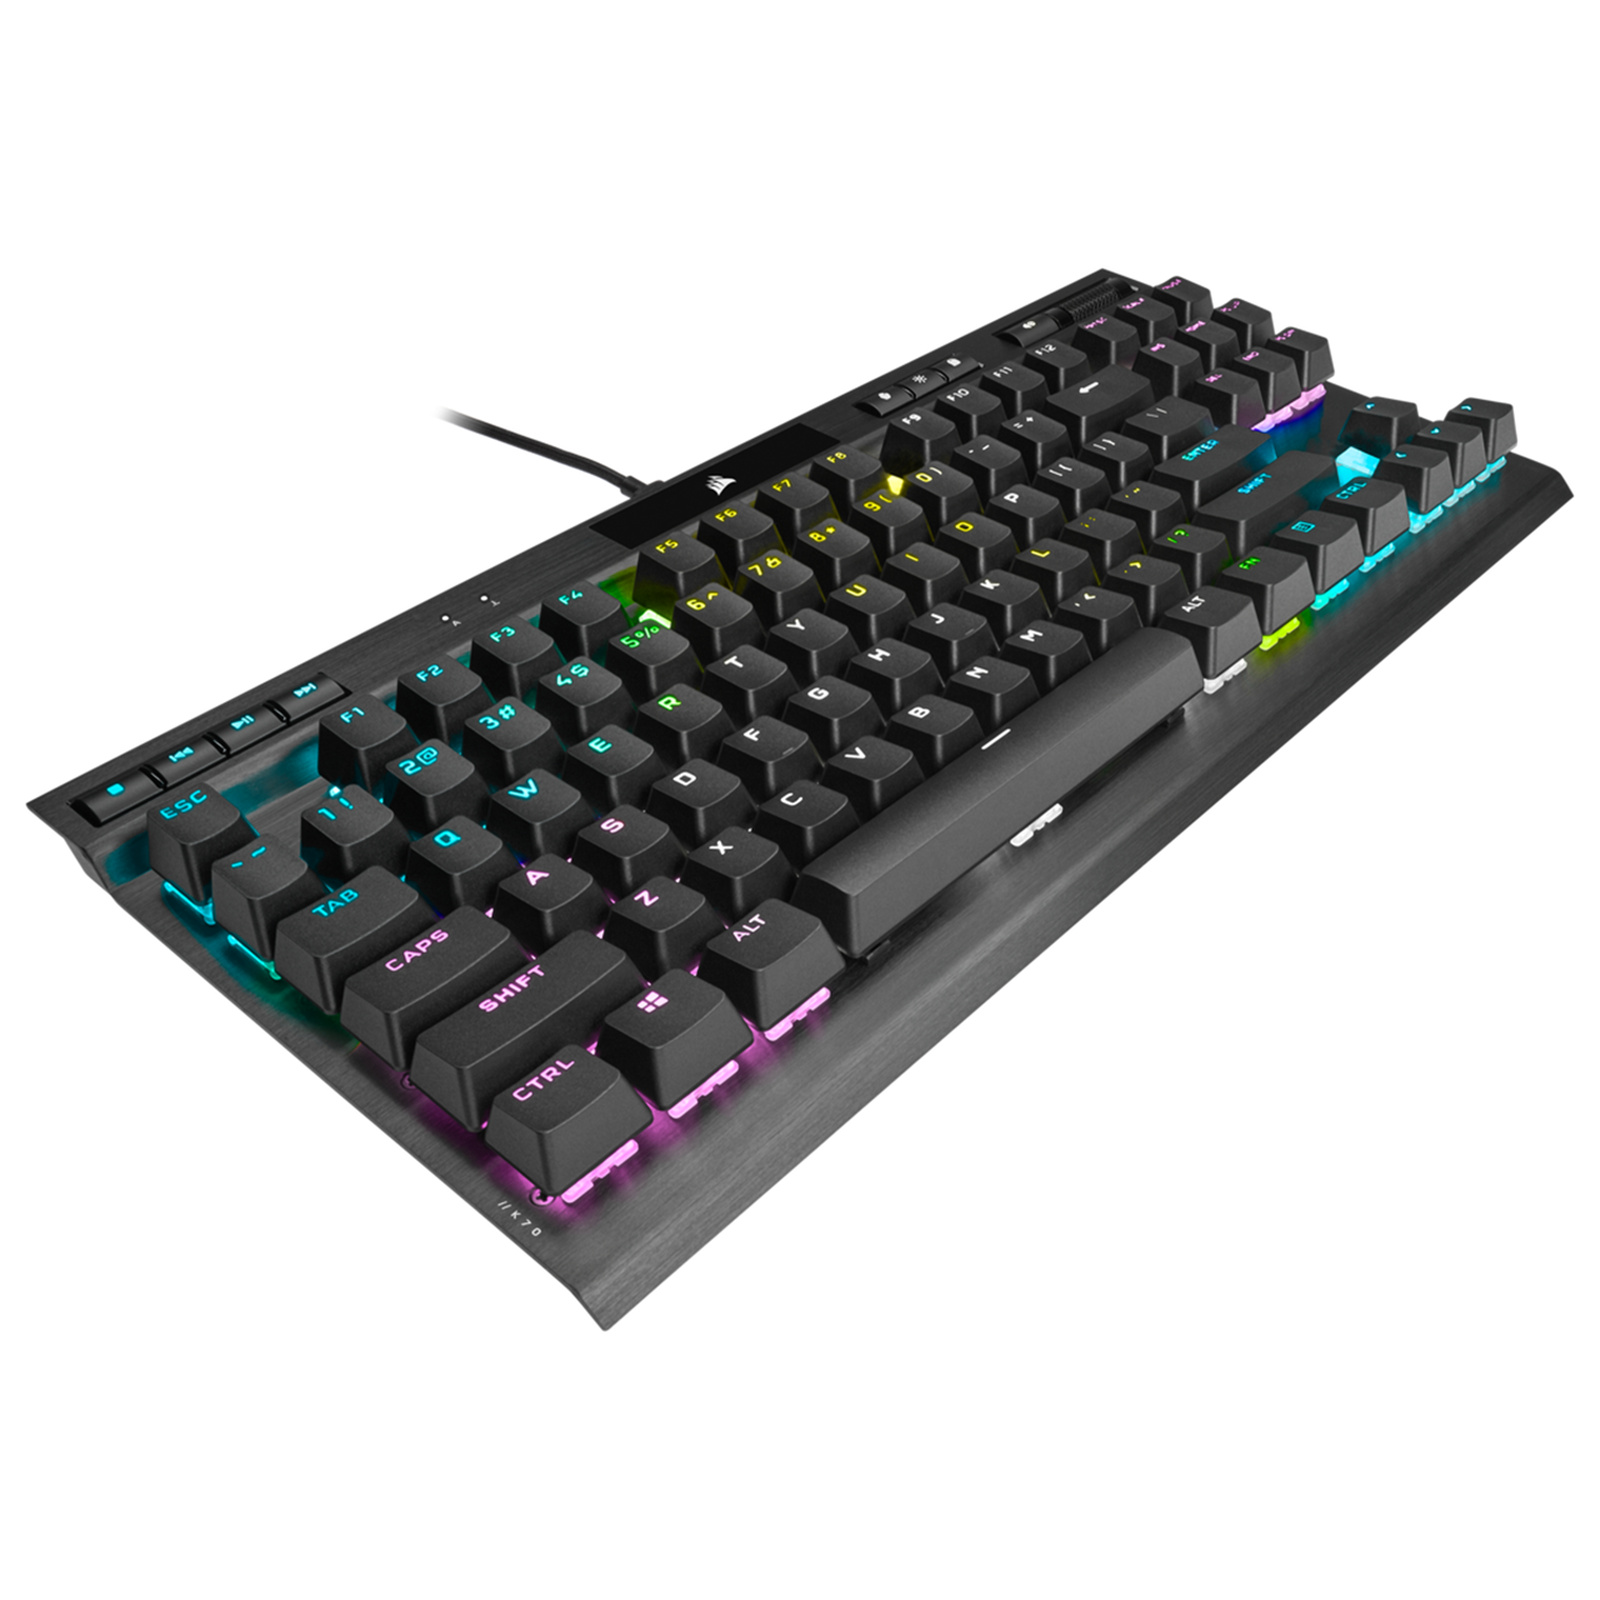 Buy the K70 RGB Mechanical Gaming Keyboard Cherry MX Speed Switch ( CH-9119014-NA ) online PBTech.com/pacific